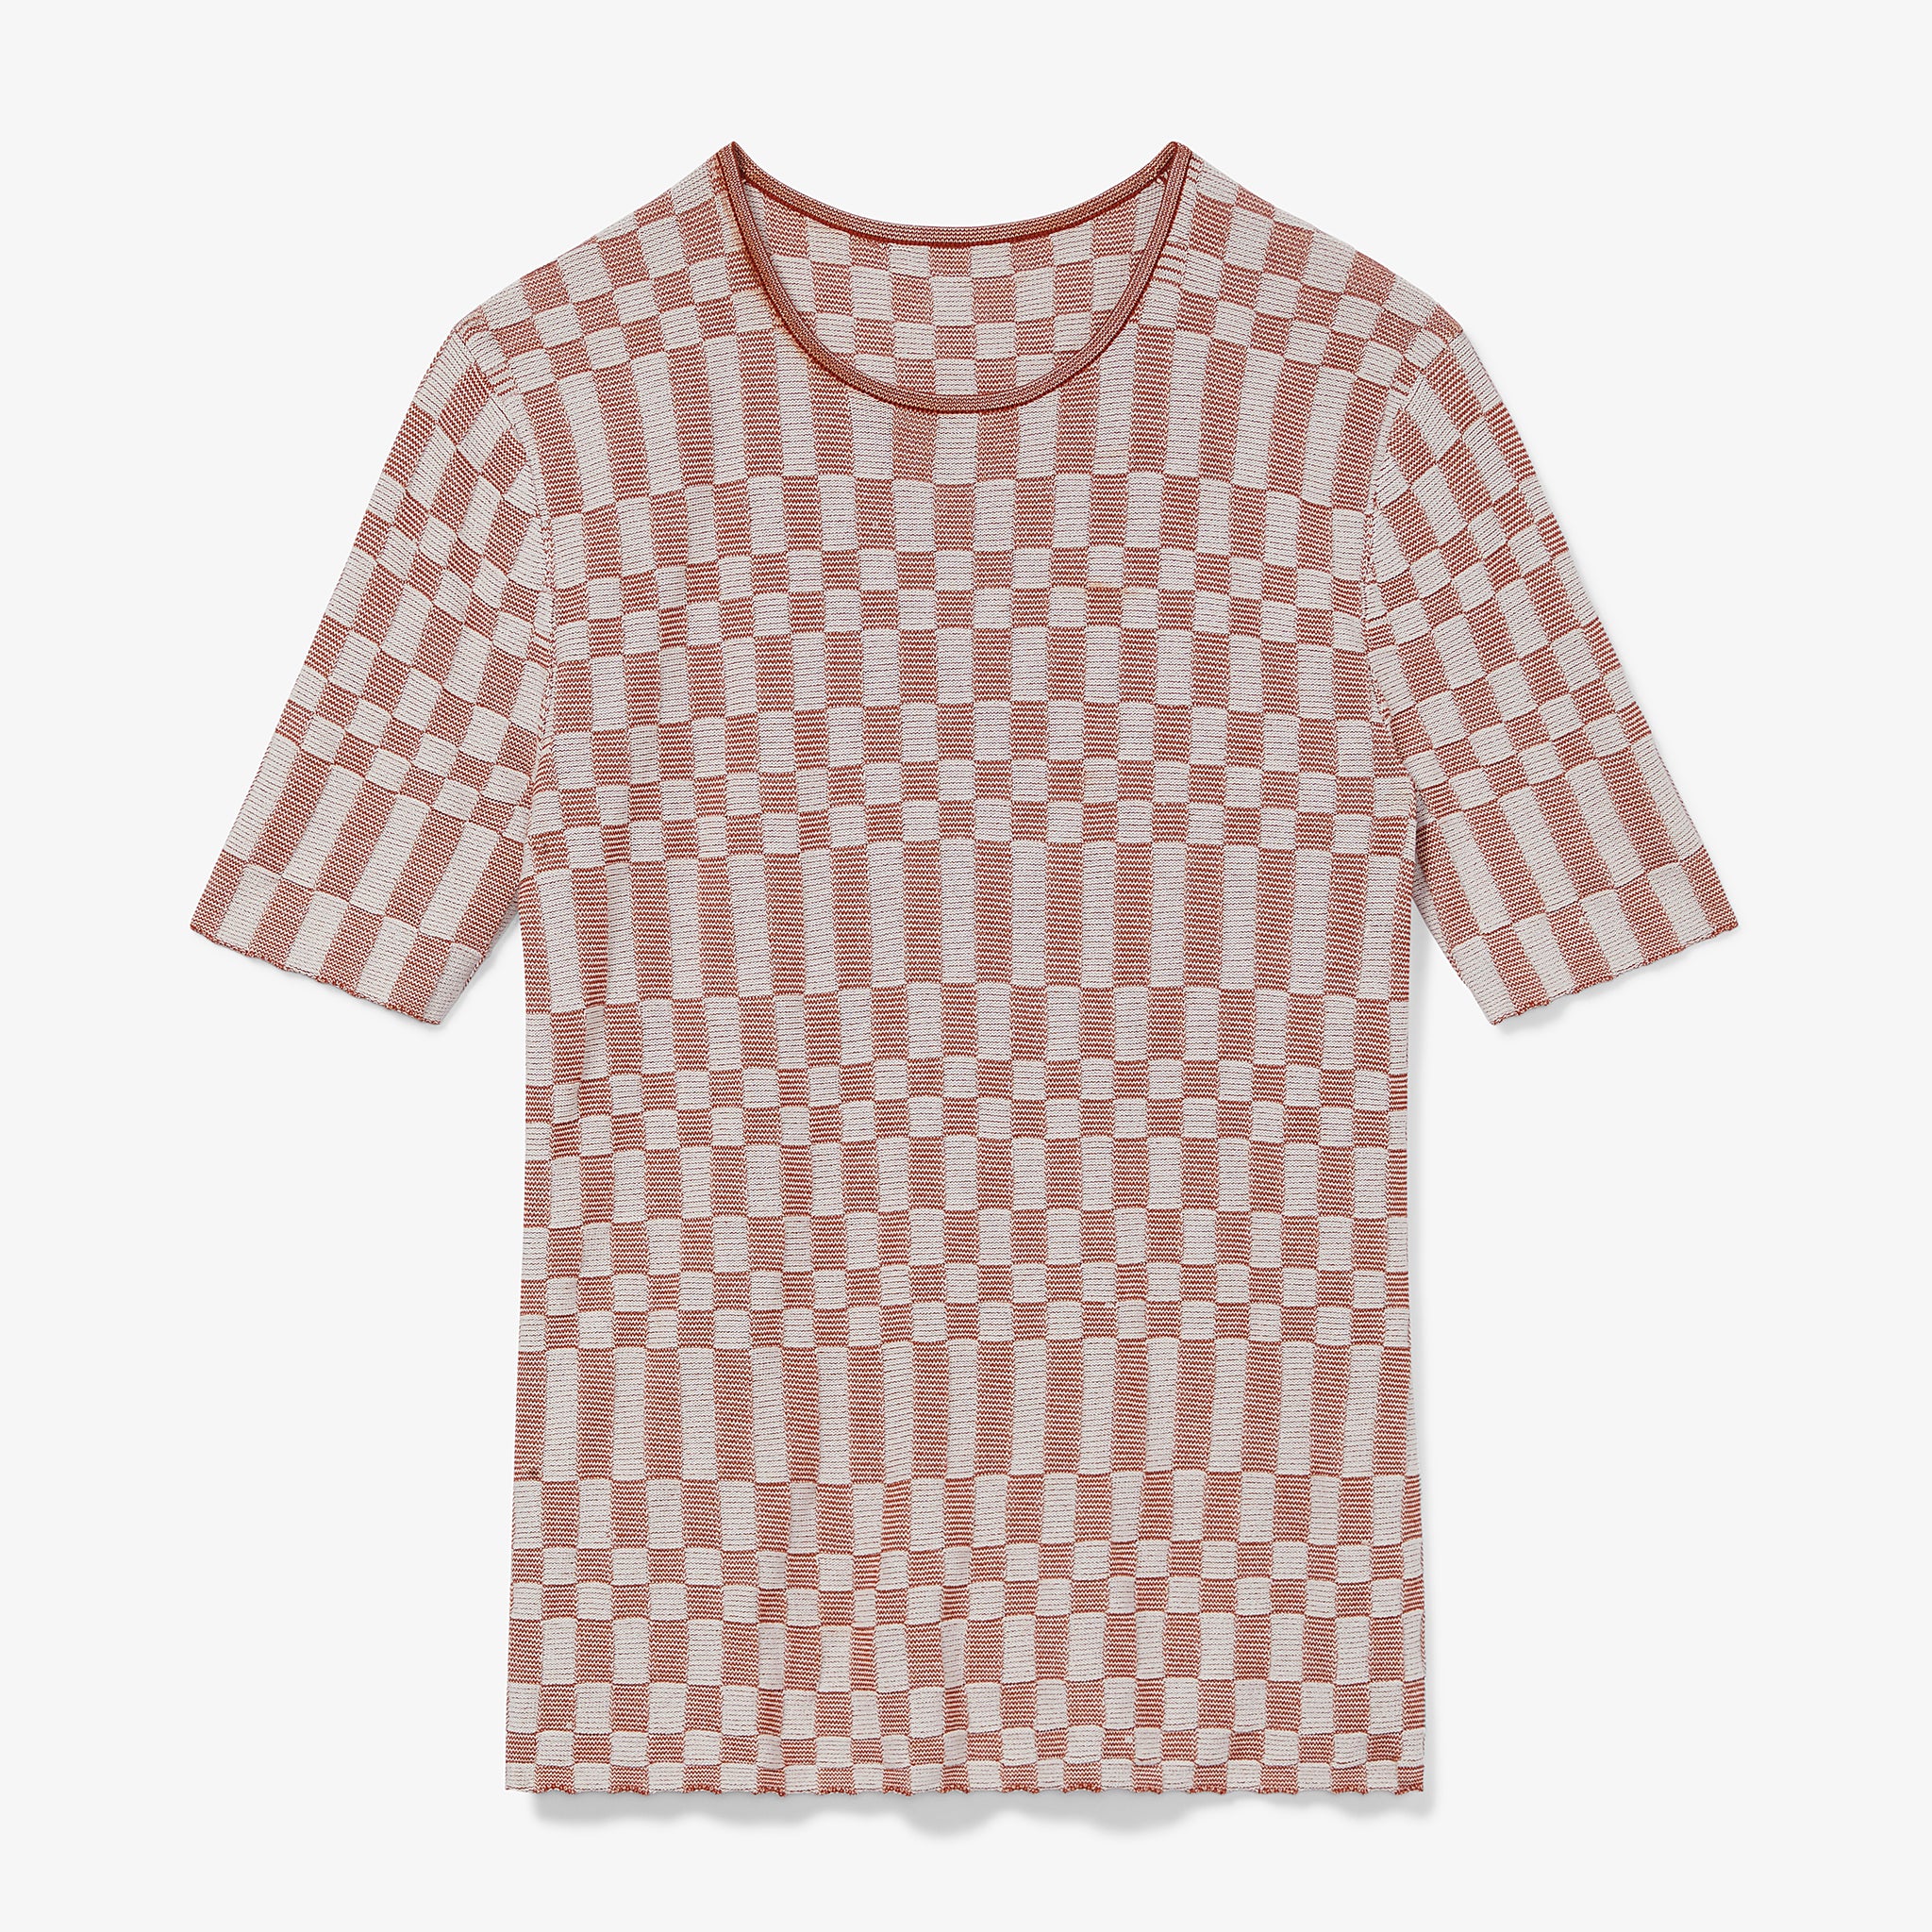 Packshot image of the Charli Top - Checkered Knit in Red Clay / Natural